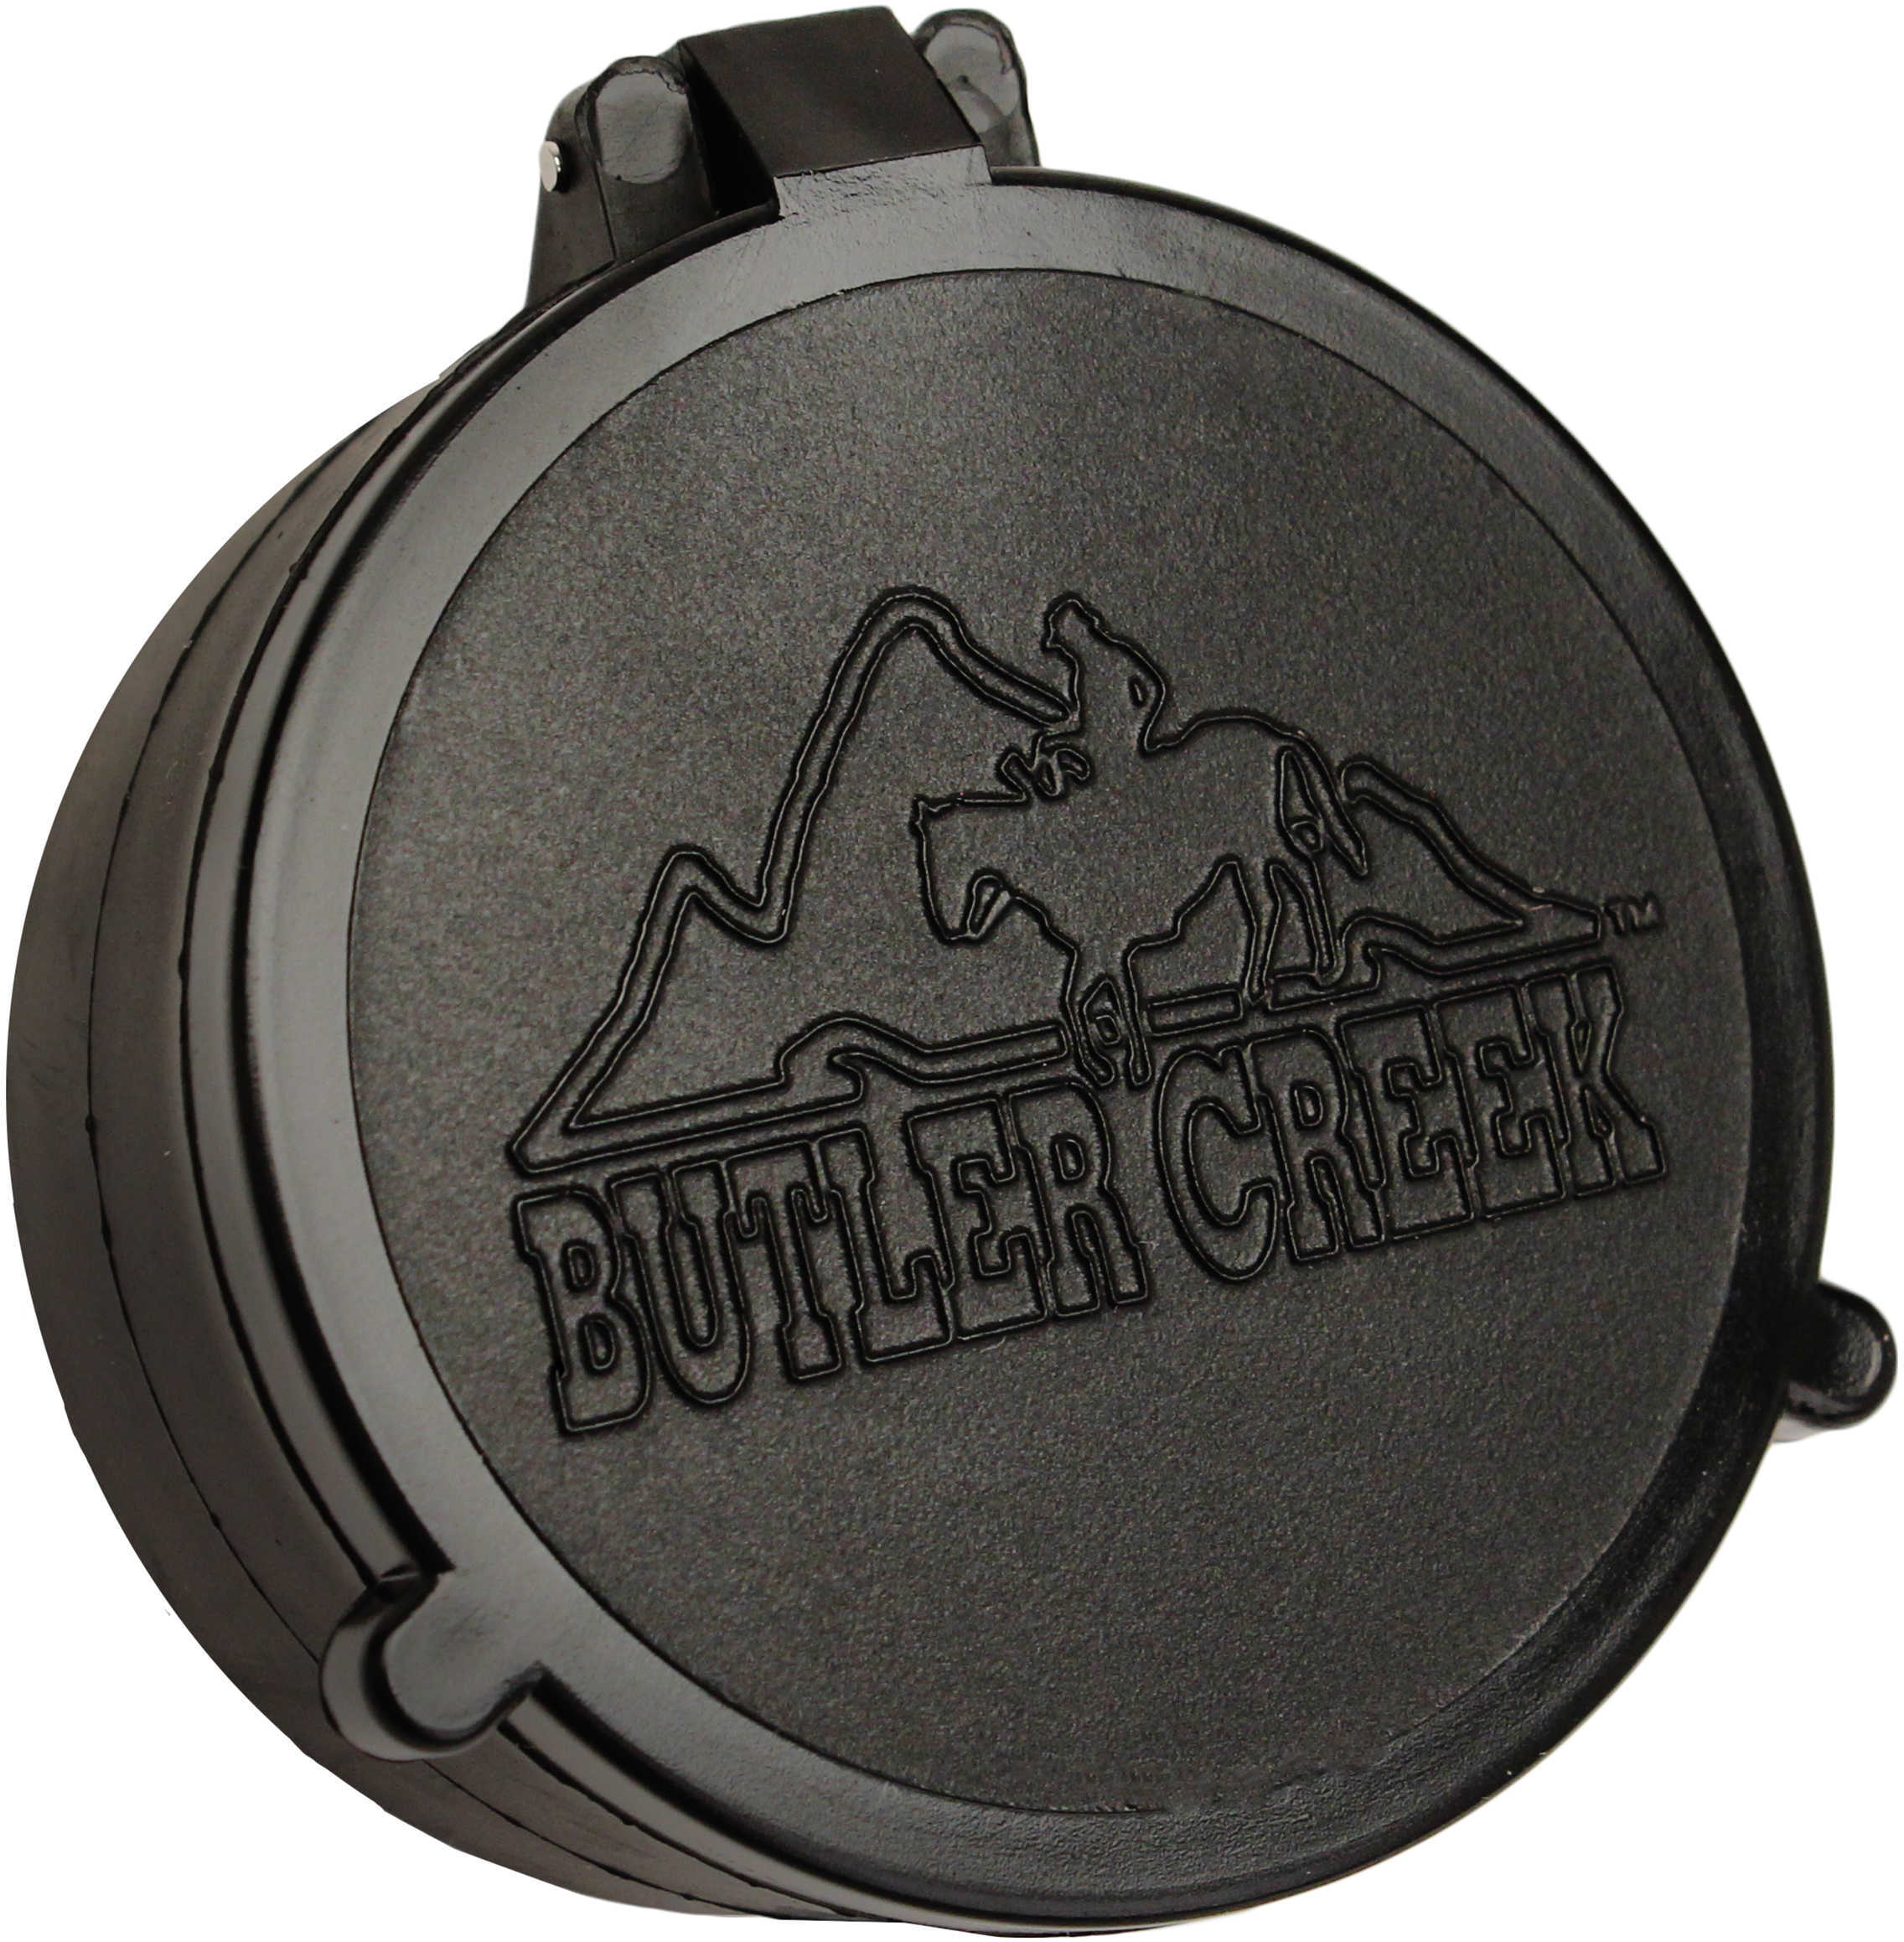 Butler Creek Flip-Open Scope Cover - 43 Objective 2.310" Diameter Quiet Opening lids at The Touch Of Your thum